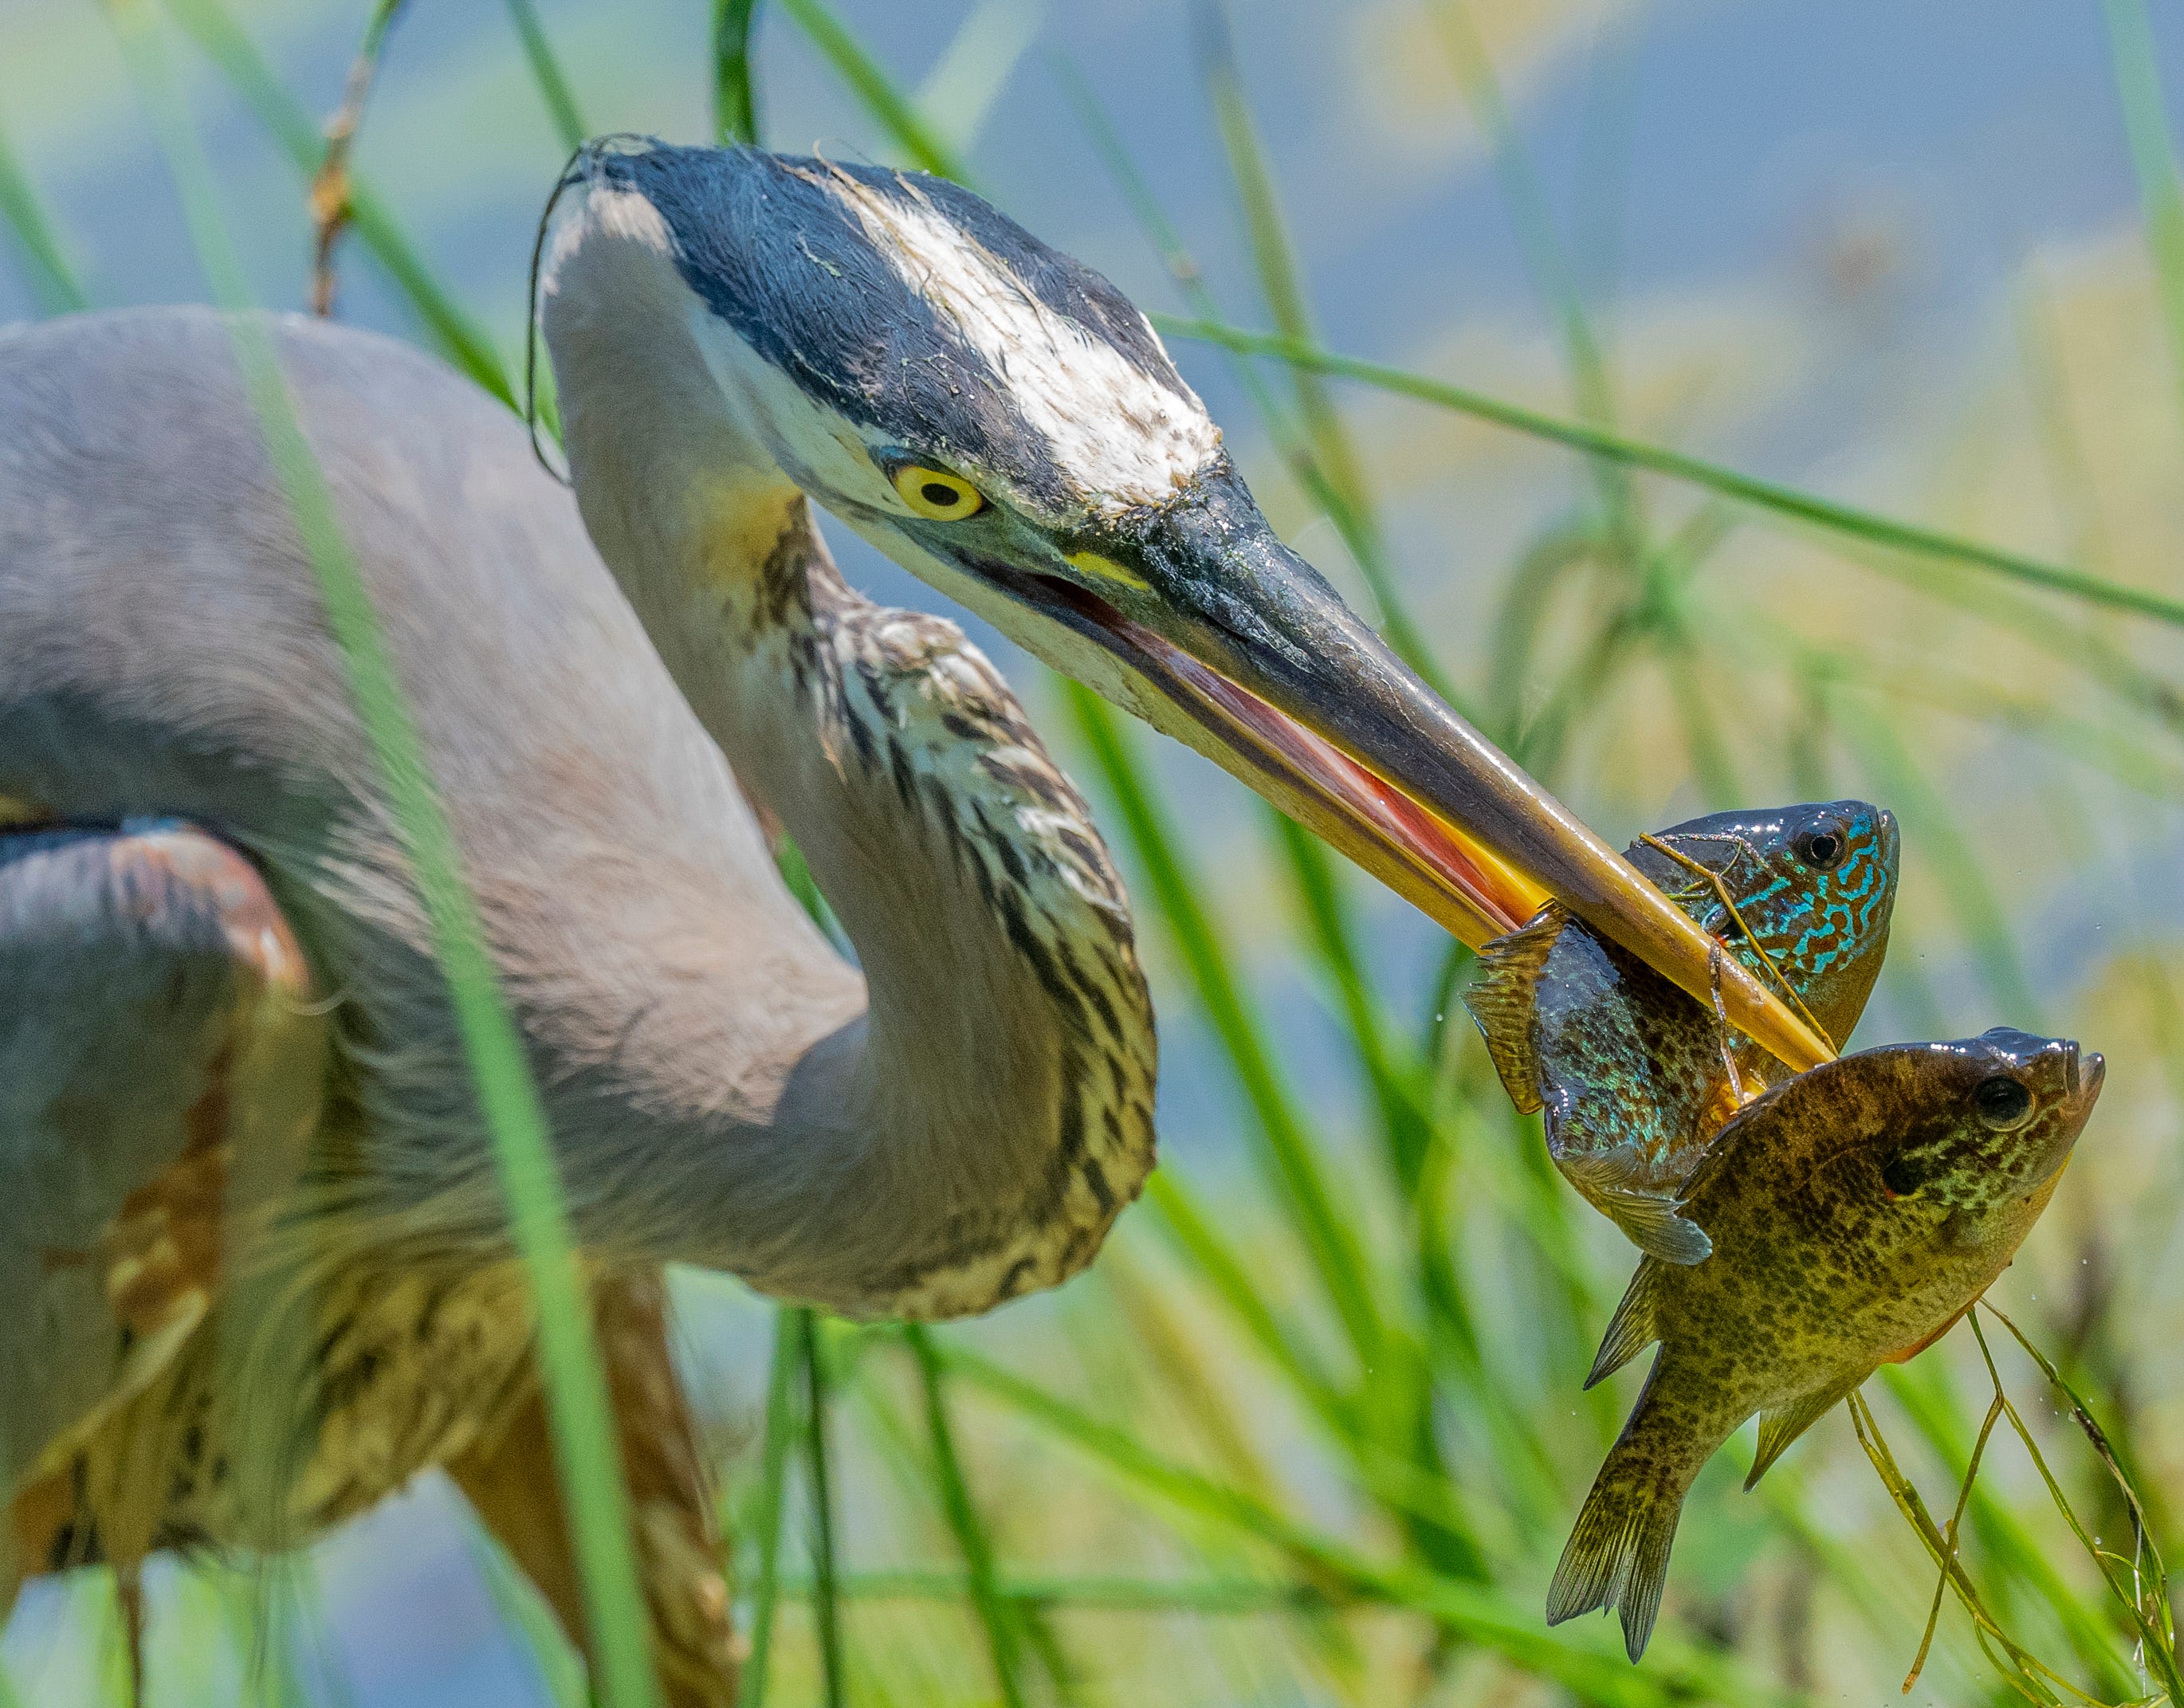 FINALIST: Fur, Feathers and Flora - Talk about a lucky catch! And we mean the great blue heron of course. Ann Arbor photographer Craig Bamm was certainly in the right place at the right time and made the most of the occasion.